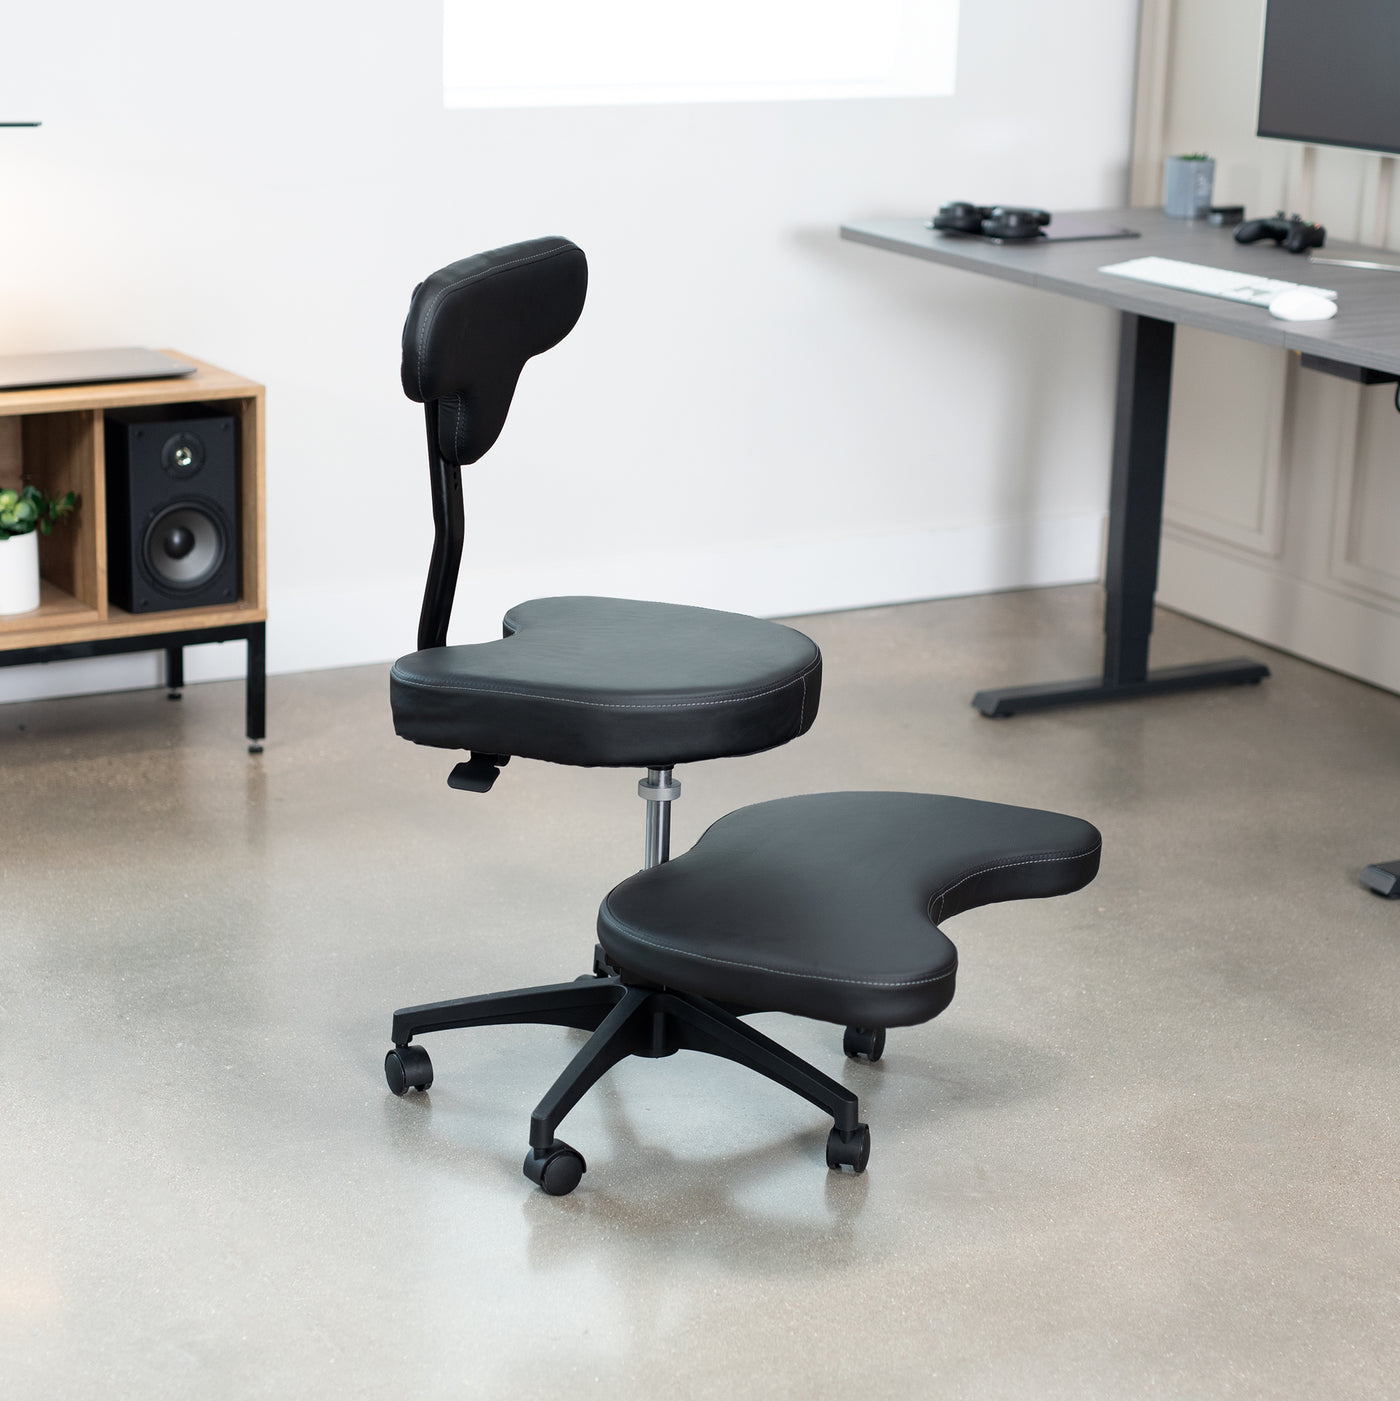 Fully adjustable cross legged desk chair with wheels for better posture and increased productivity.